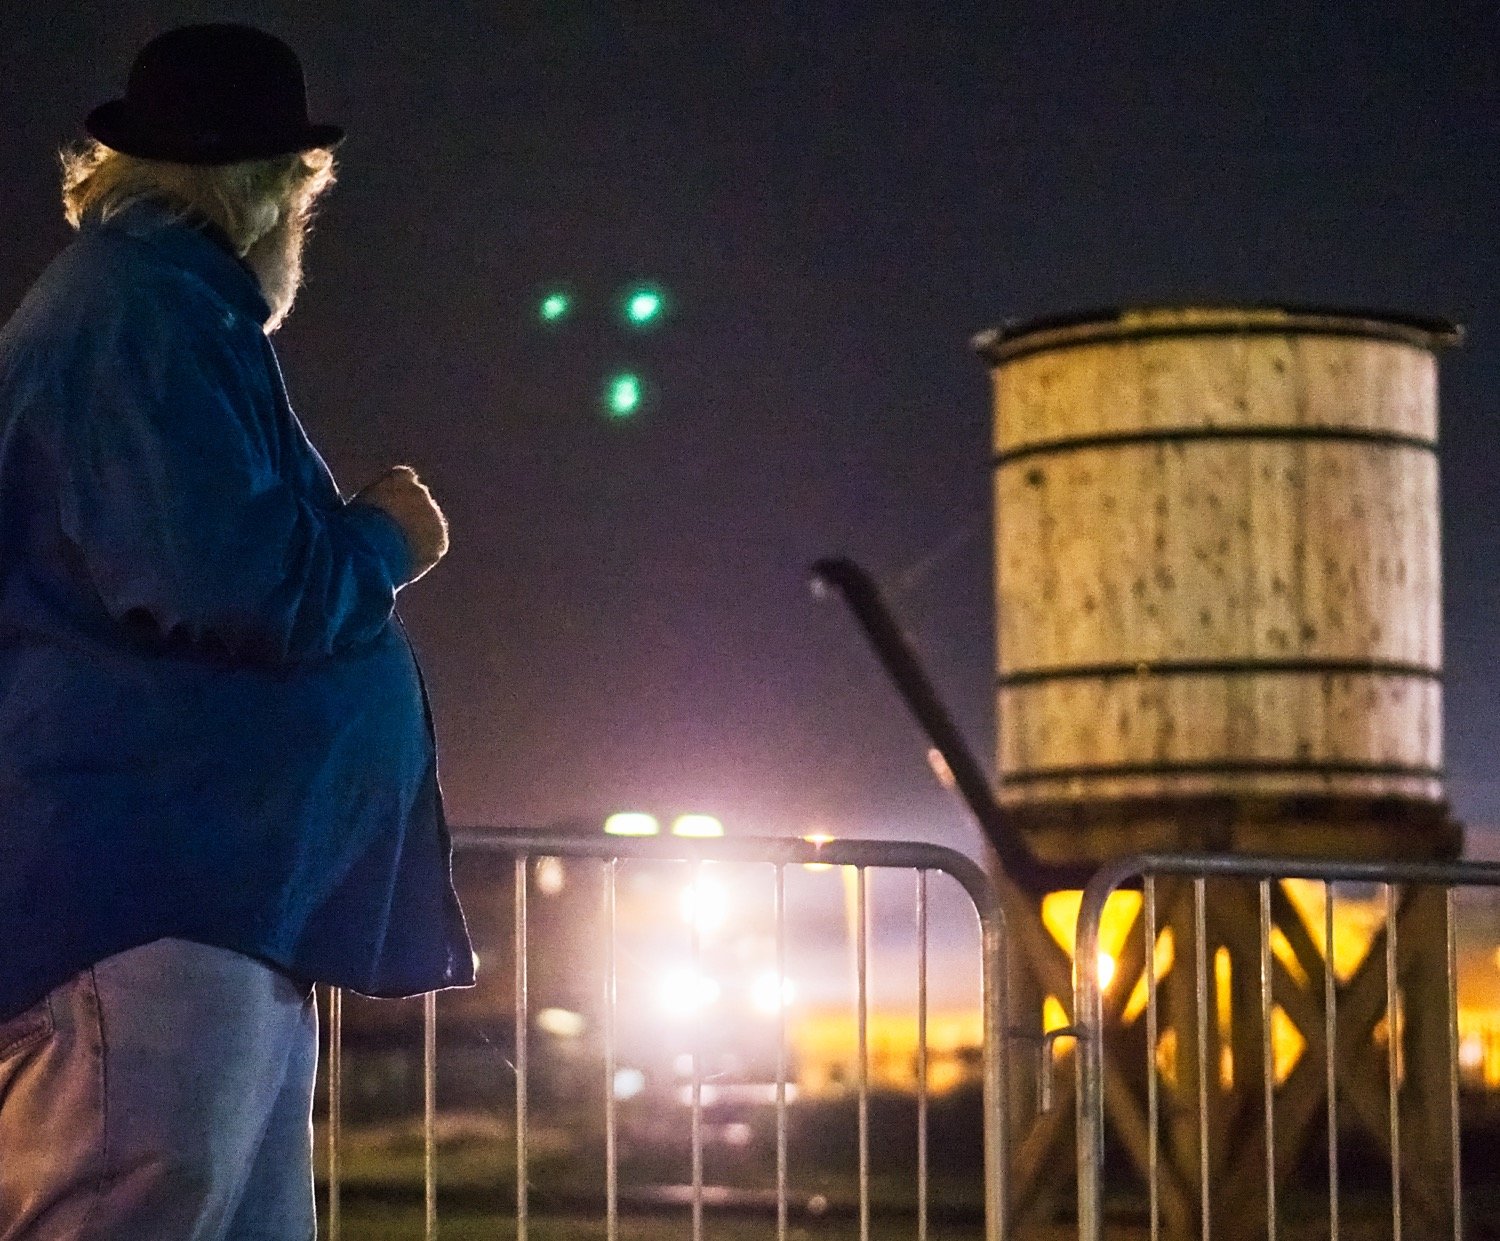 Jeff Hurley pauses his ghost story to look toward an approaching train.